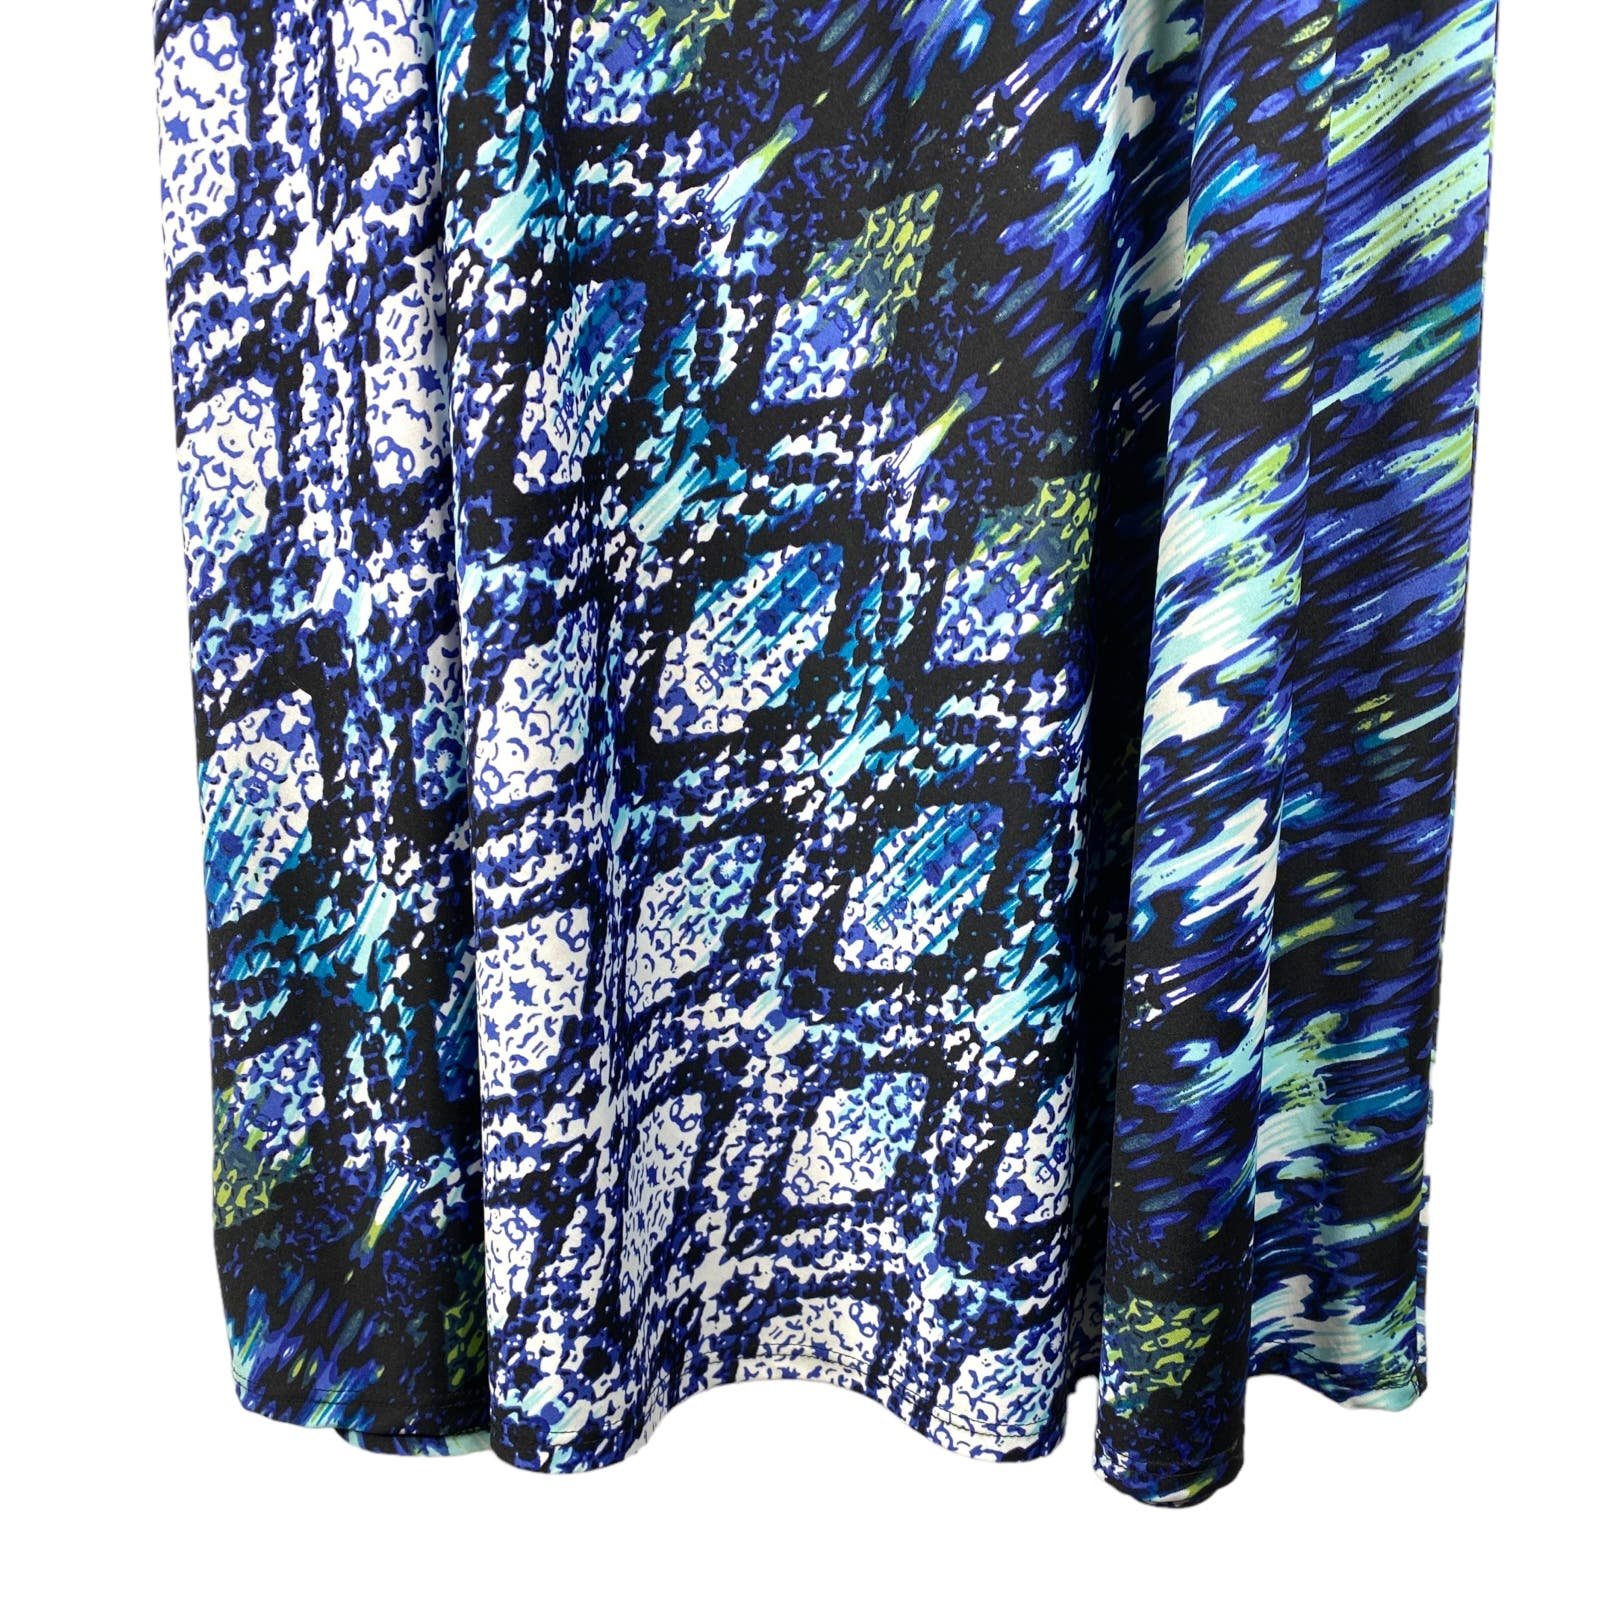 save up to 70% Sunny Leigh Maxi Skirt Large Blue Green Watercolor Geo Print Slinky Stretchy Fqdix9MIV on sale